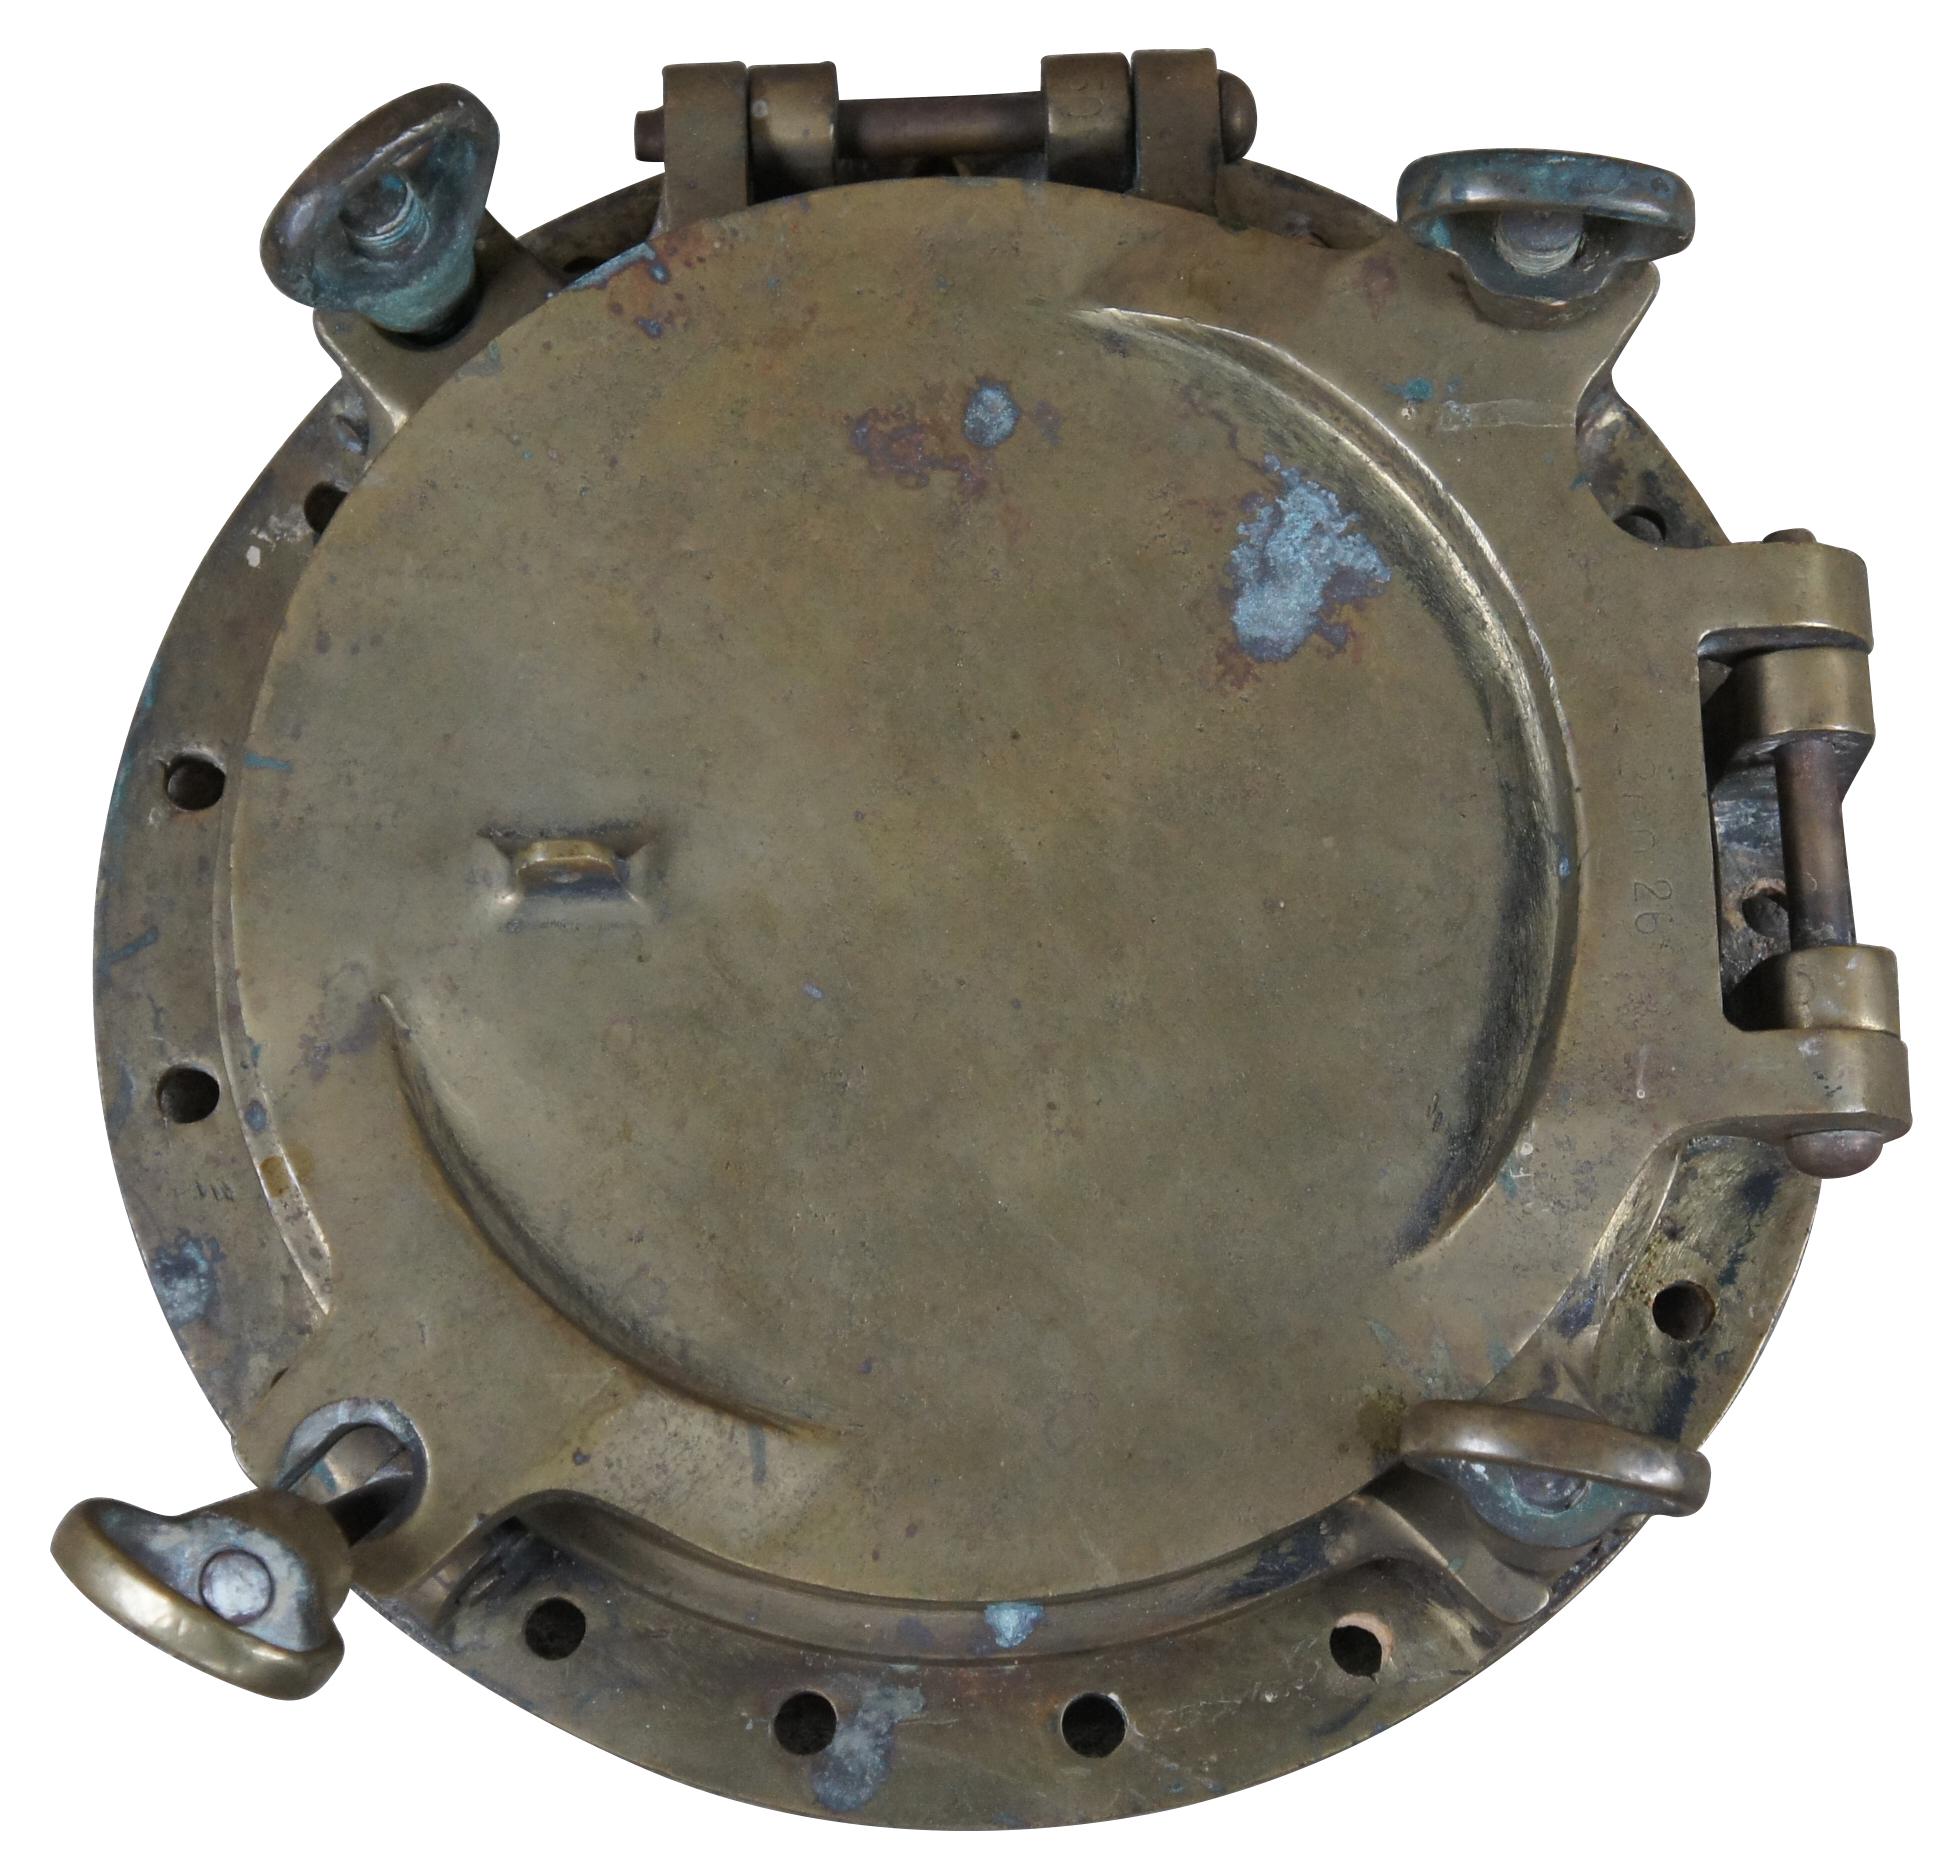 Extremely unique original antique heavy solid brass maritime Ship's Porthole or Hatch. A rare find with storm door, swing plate and barking plate. Its very unusual to find a complete porthole with swing plate. They are most often found as just a